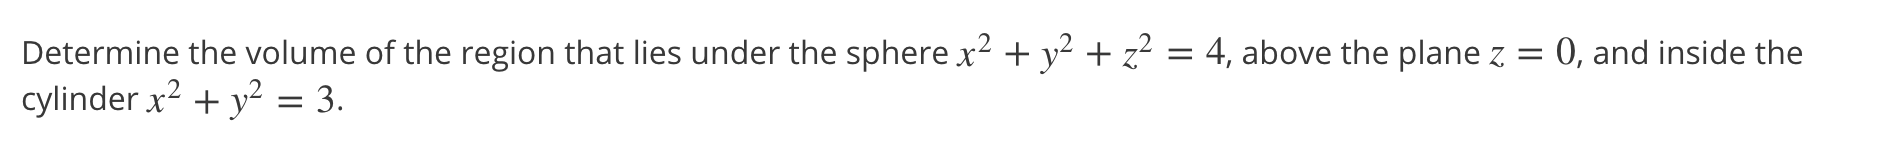 Determine the volume of the region that lies under the sphere x² + y² + z² = 4, above the plane z
cylinder x2 + y? = 3.
= 0, and inside the
